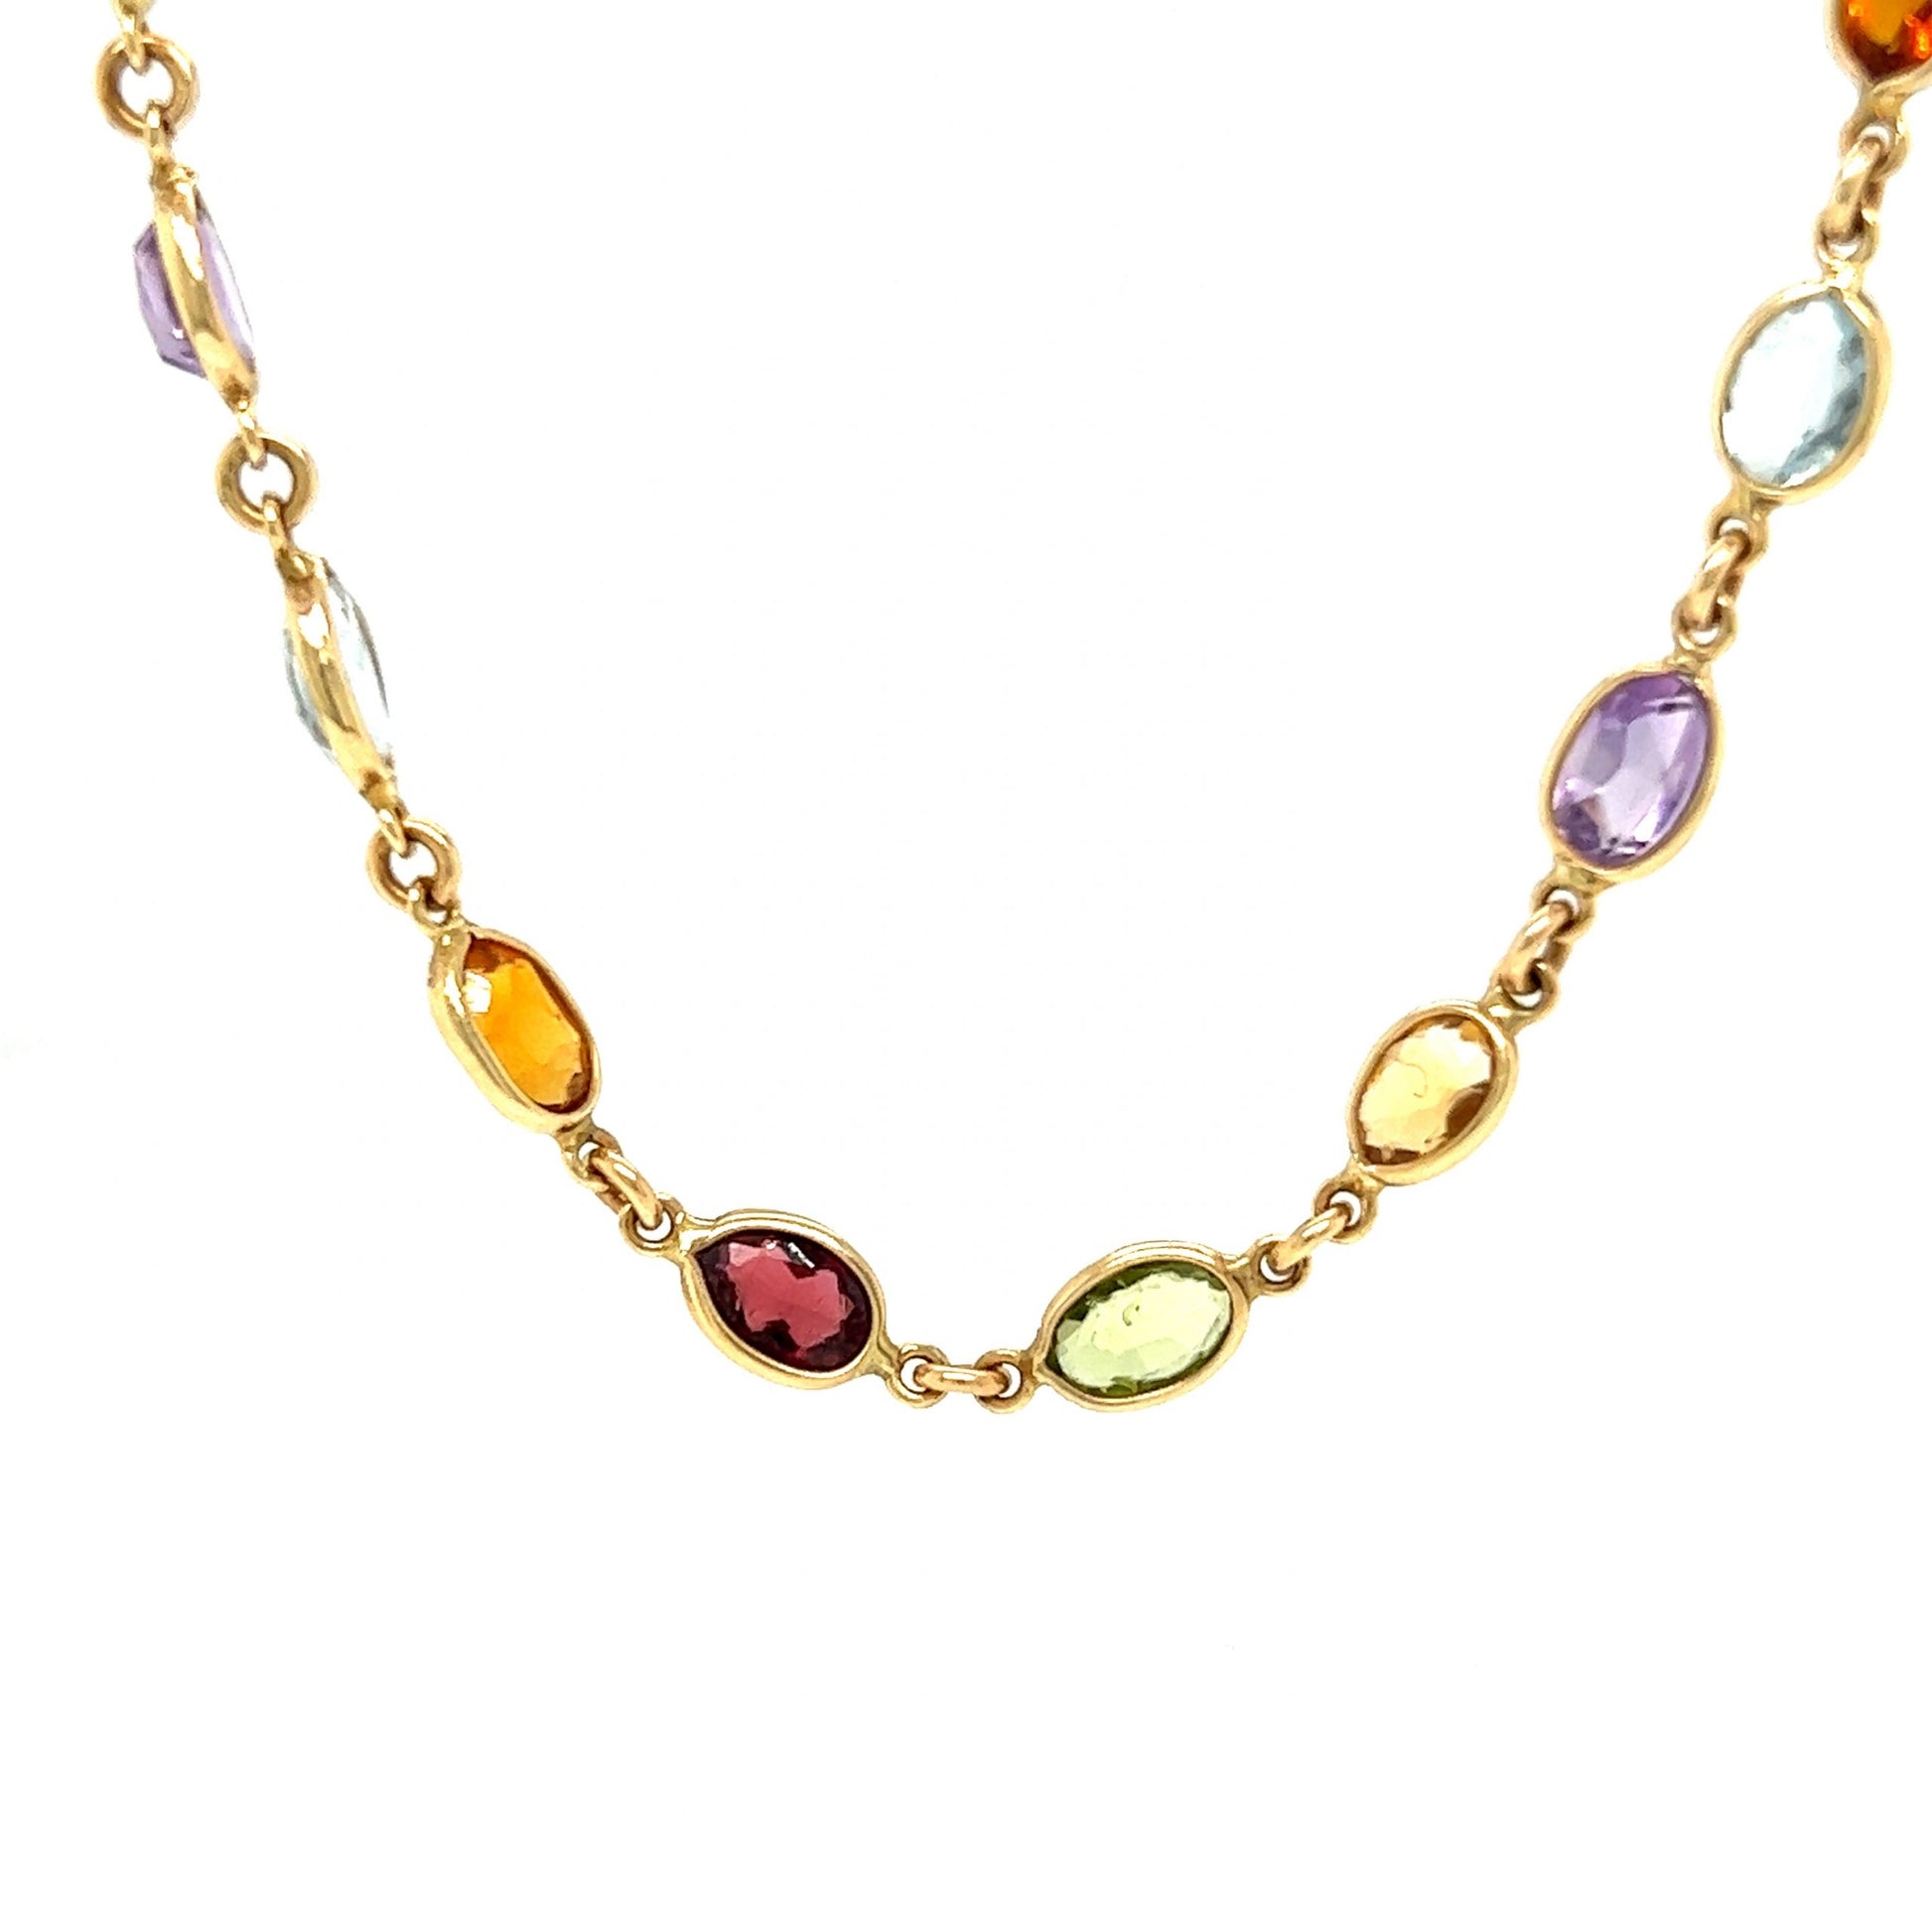 Multi-Color Gemstone Necklace in 14k Yellow GoldComposition: 14 Karat Yellow Gold Total Gram Weight: 14.3 g Inscription: 14k  ITALY
      